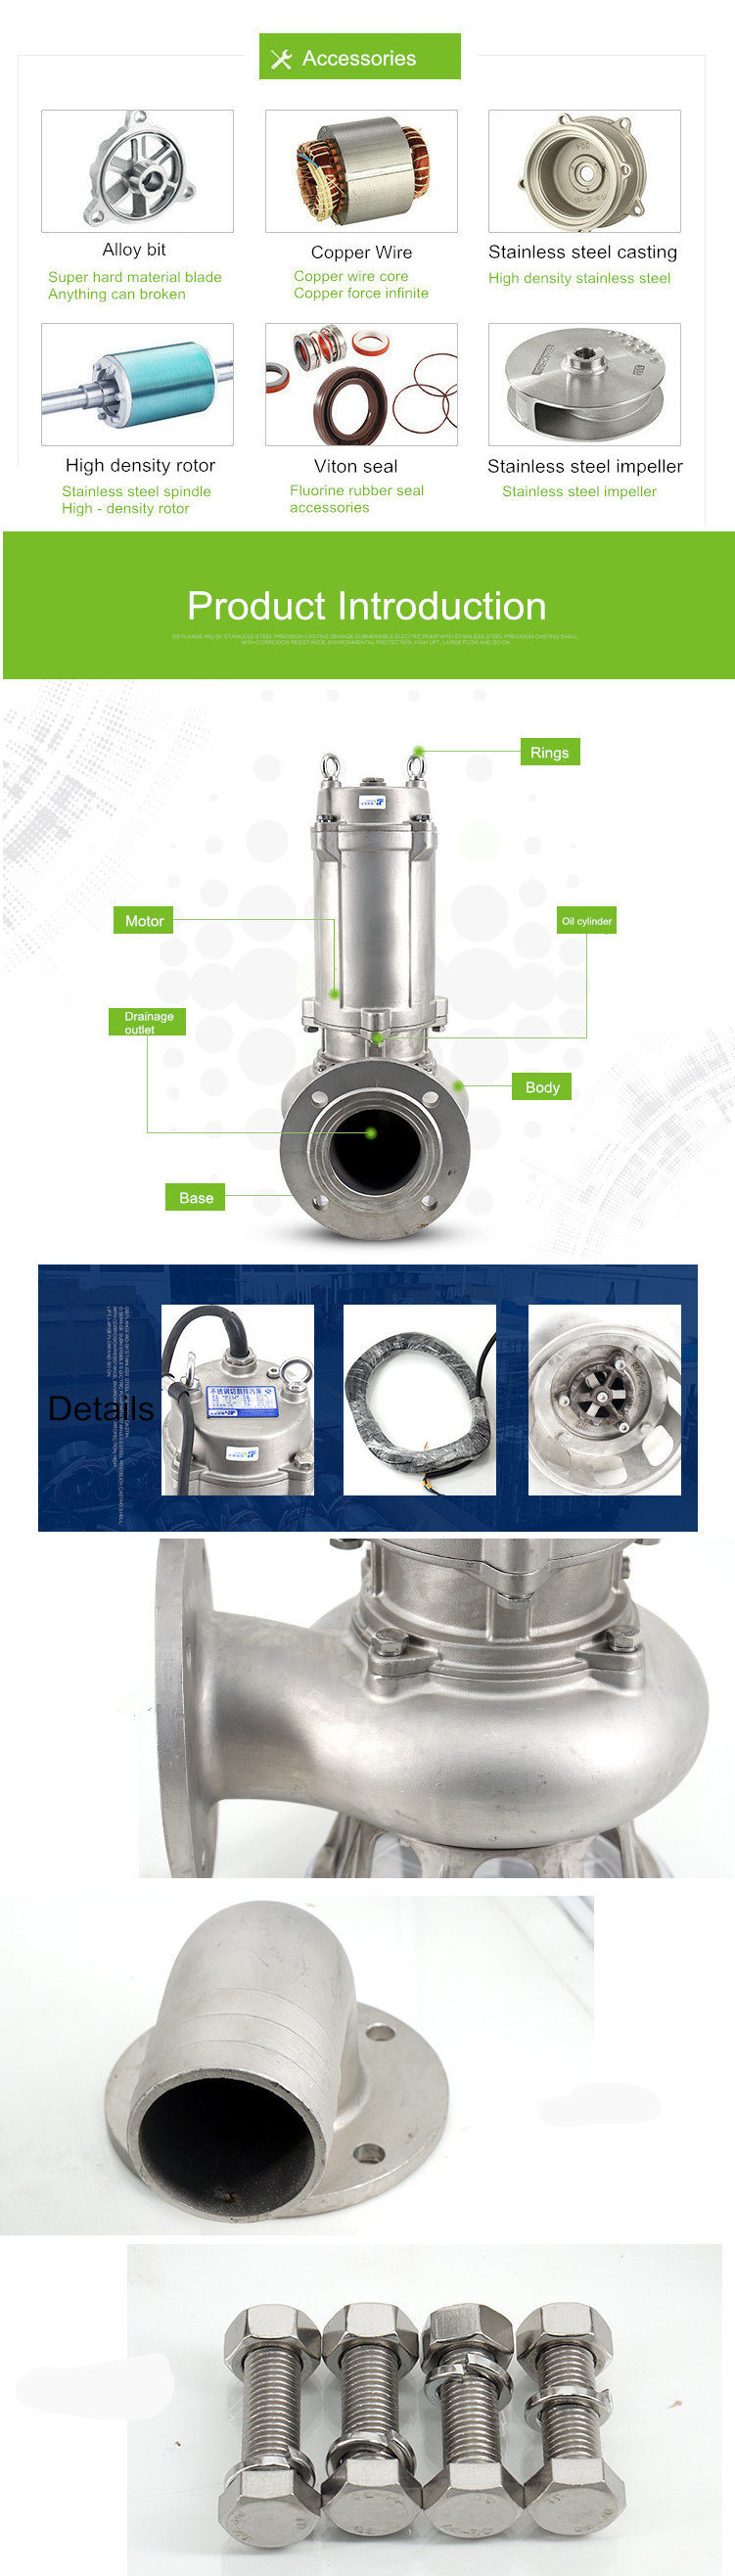 Non-Clog Centrifugal Submersible Drainage Pump, Submerged Sump, Slurry Pump, Grinder Pump with Cutting Type Impeller